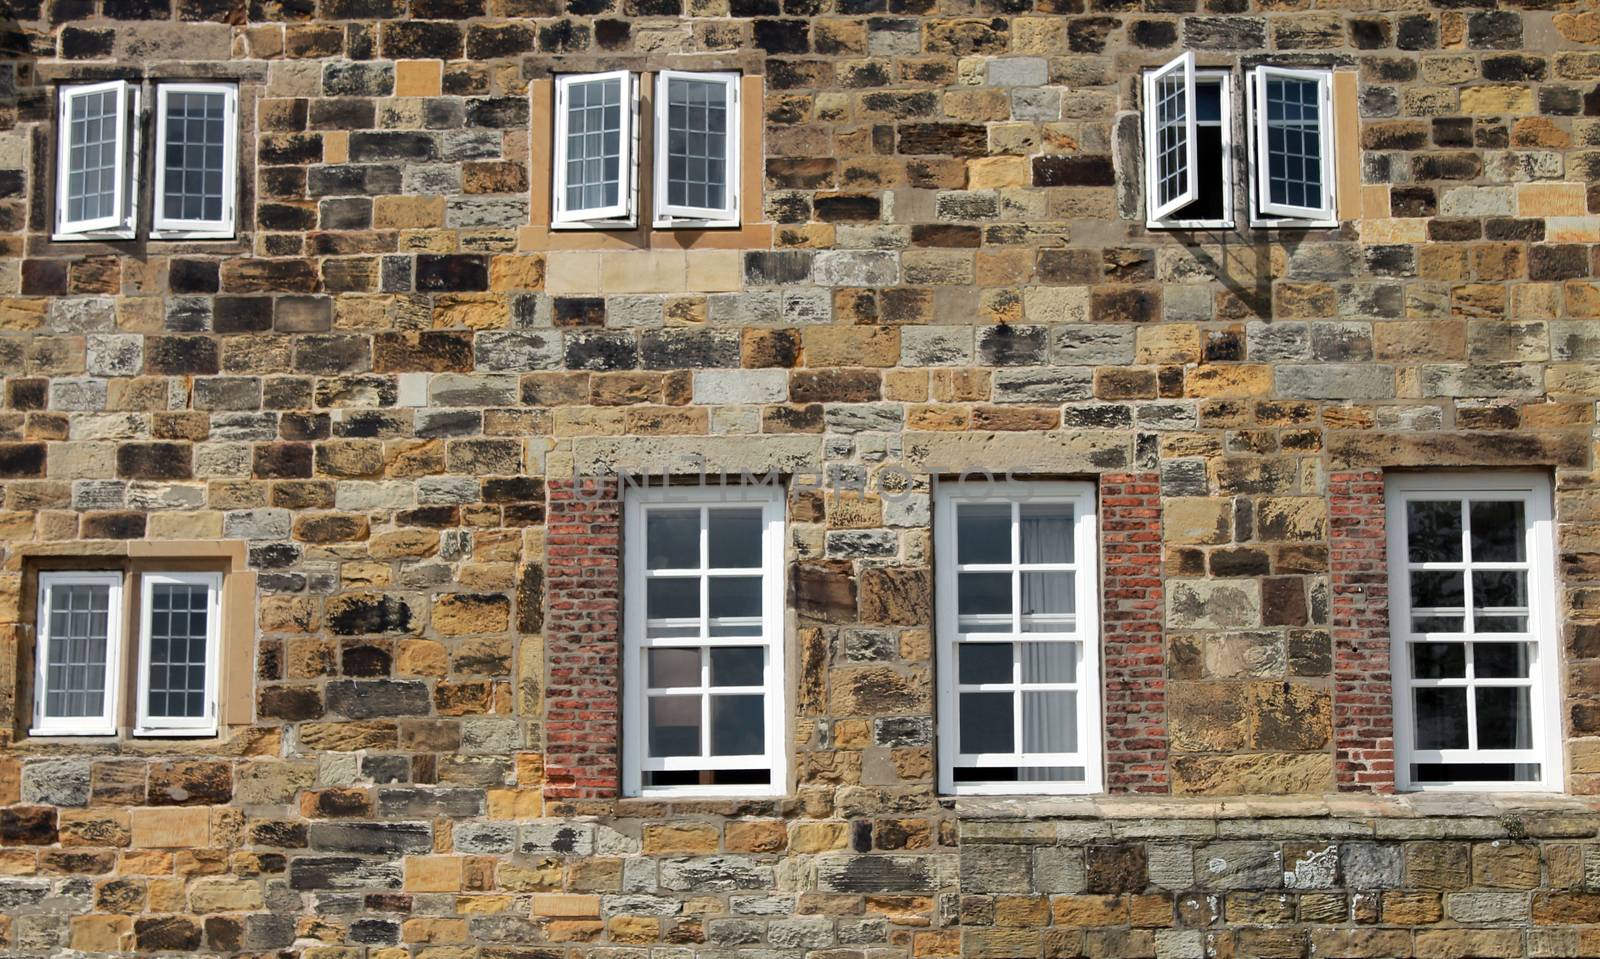 Exterior of a historic stone building with wooden framed windows.